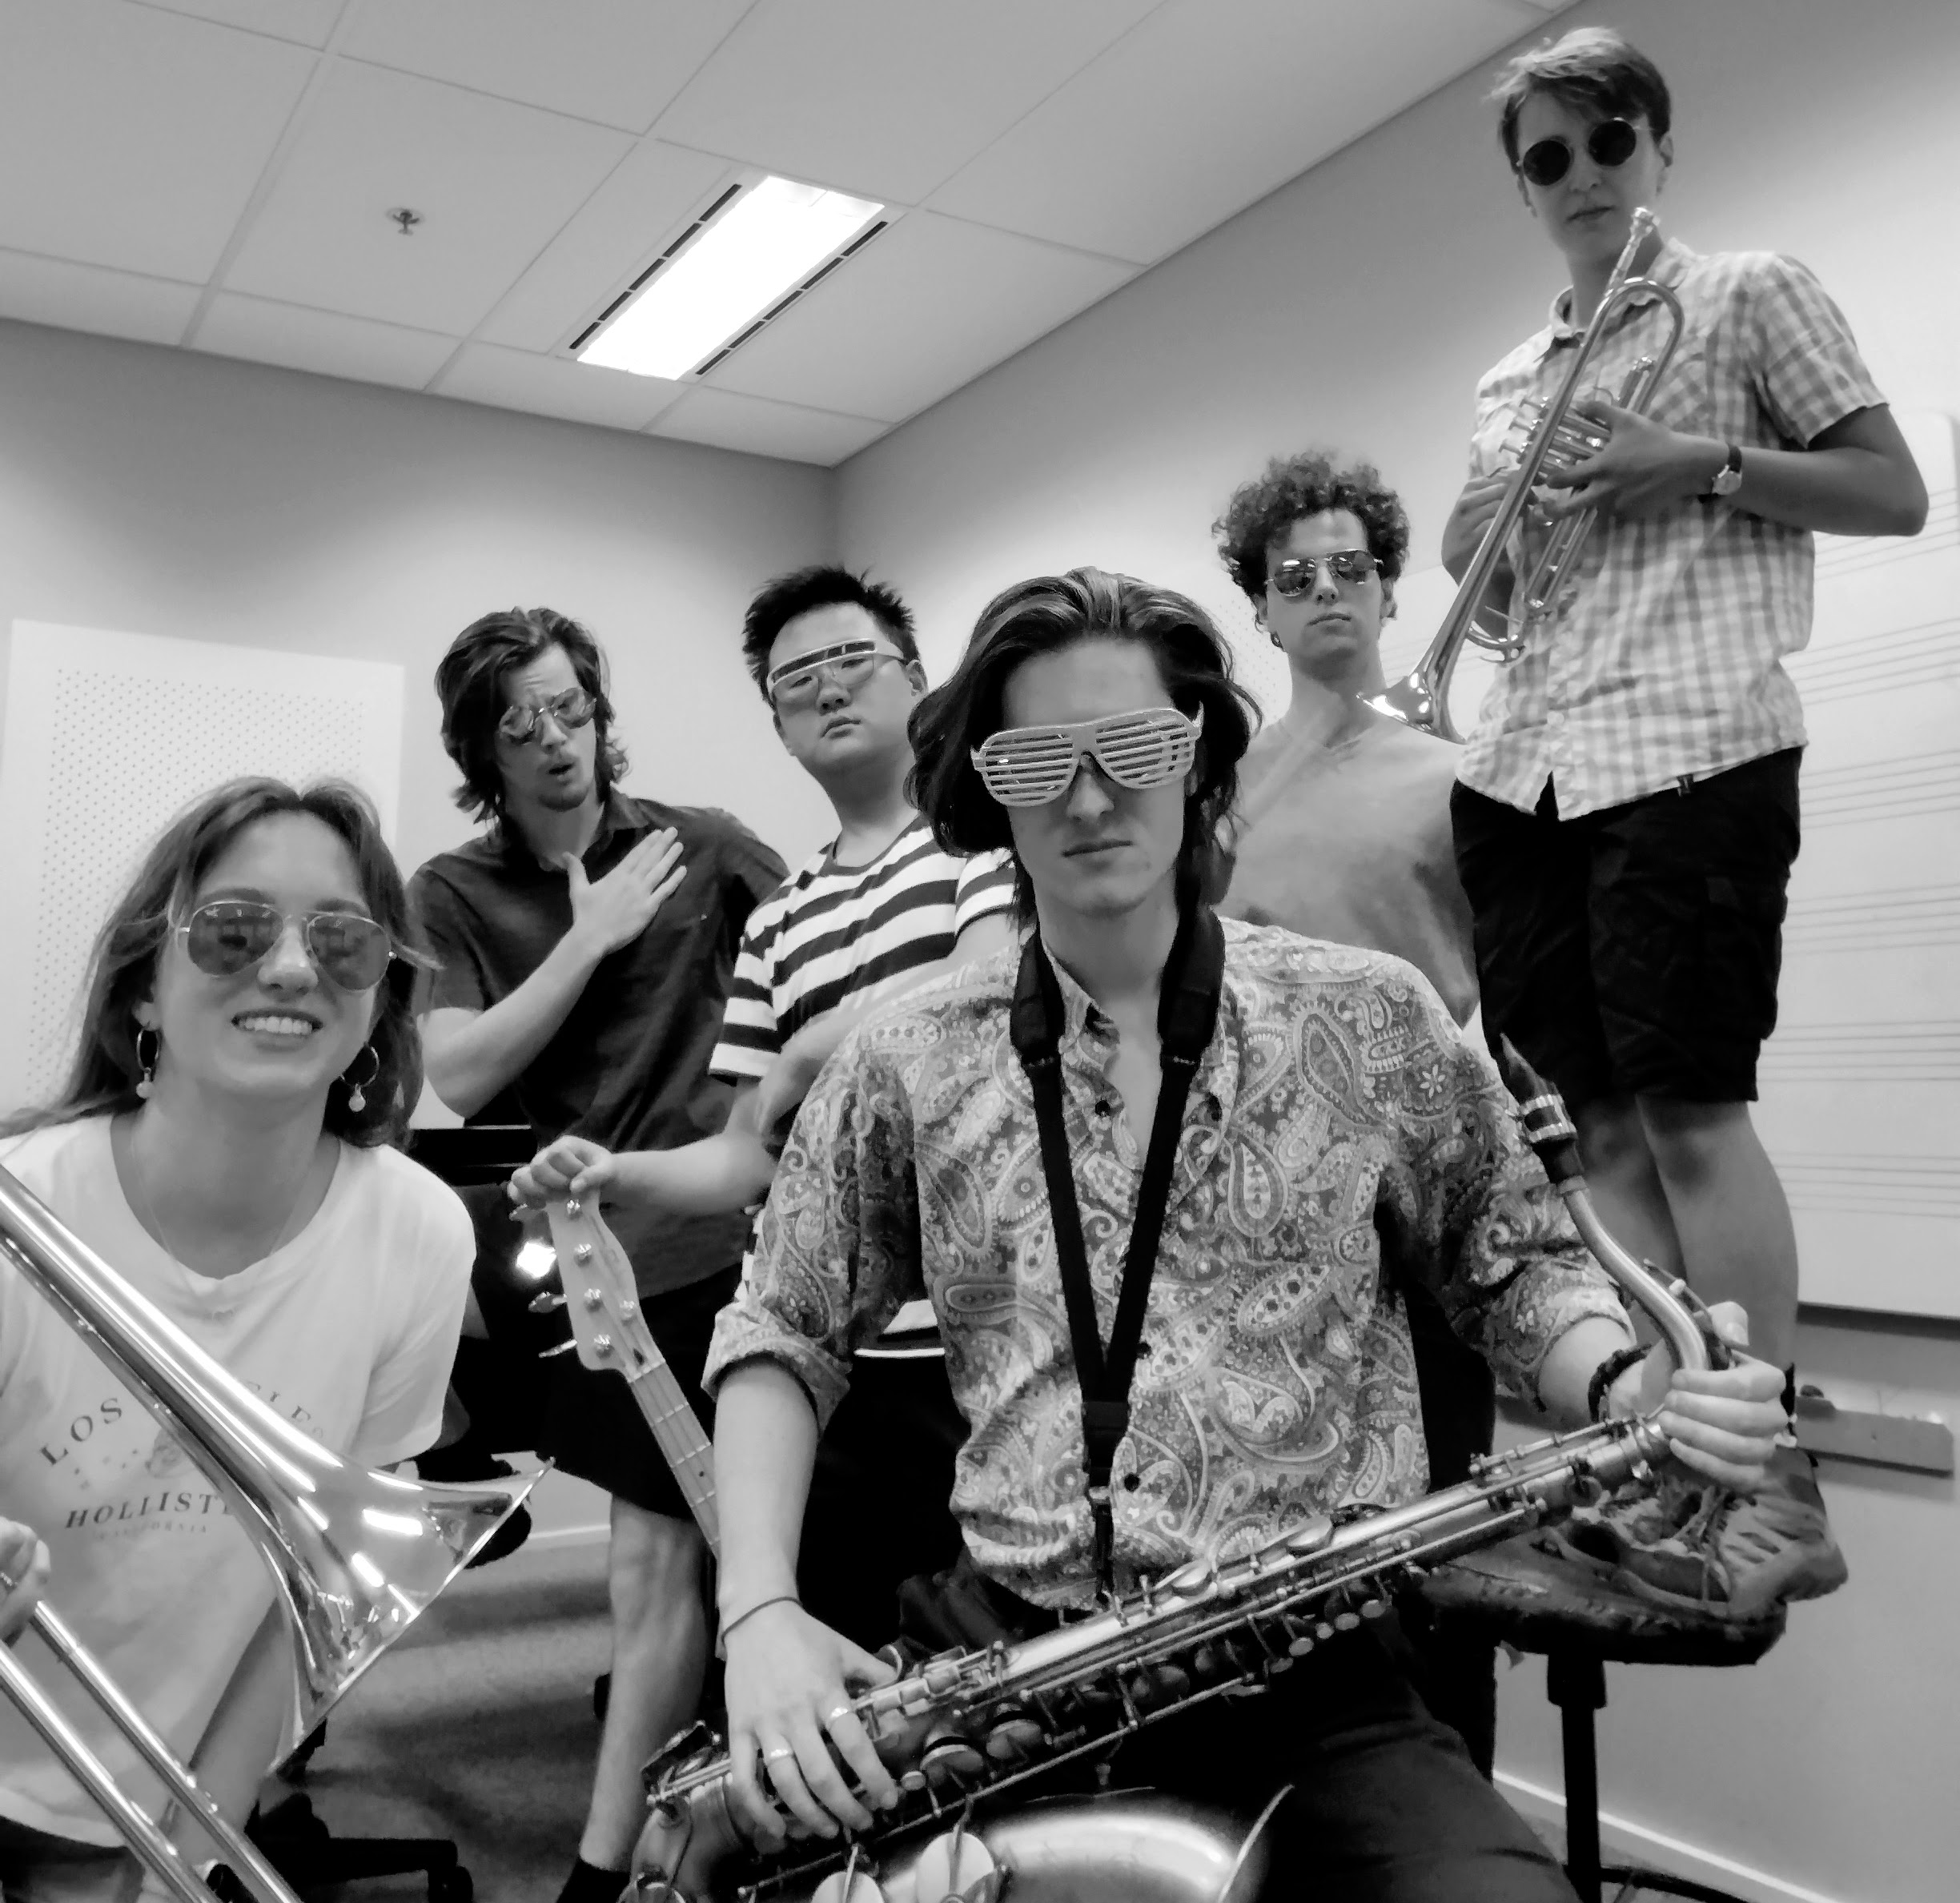 People wearing sunglasses and holding musical instruments.